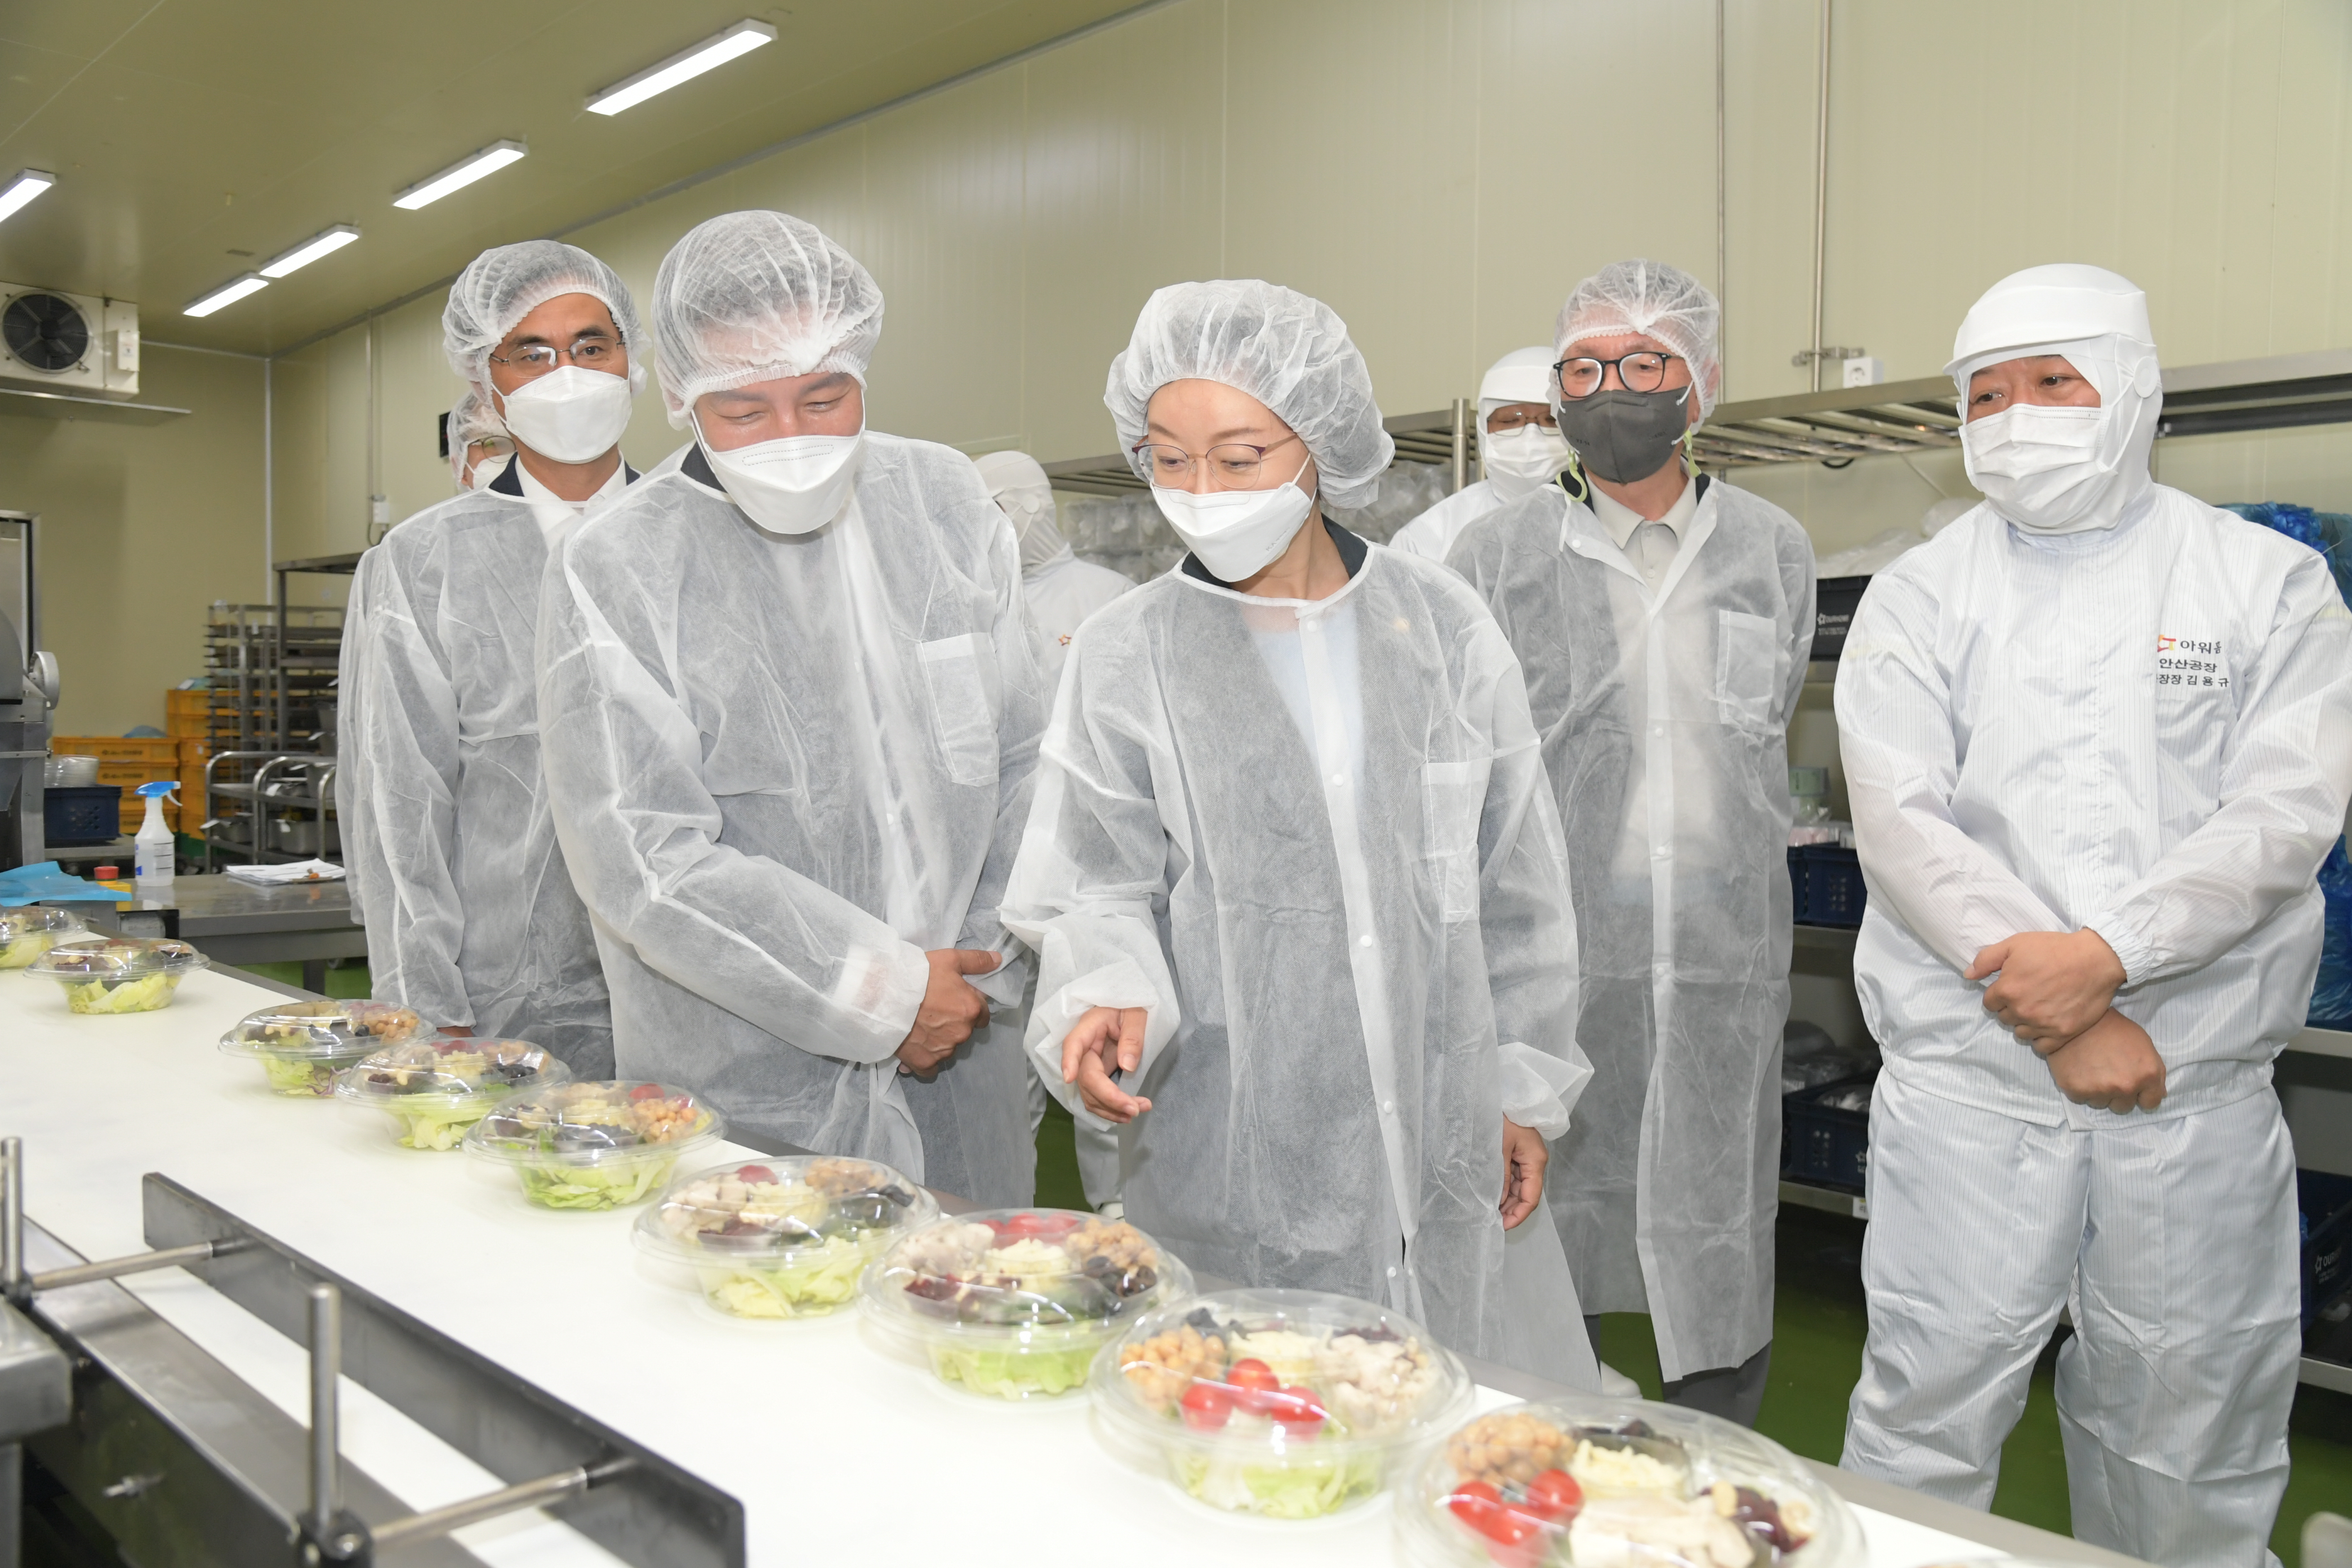 Photo News4 - [June 15, 2021] Minister Visits a Home Meal Replacement Manufacturer